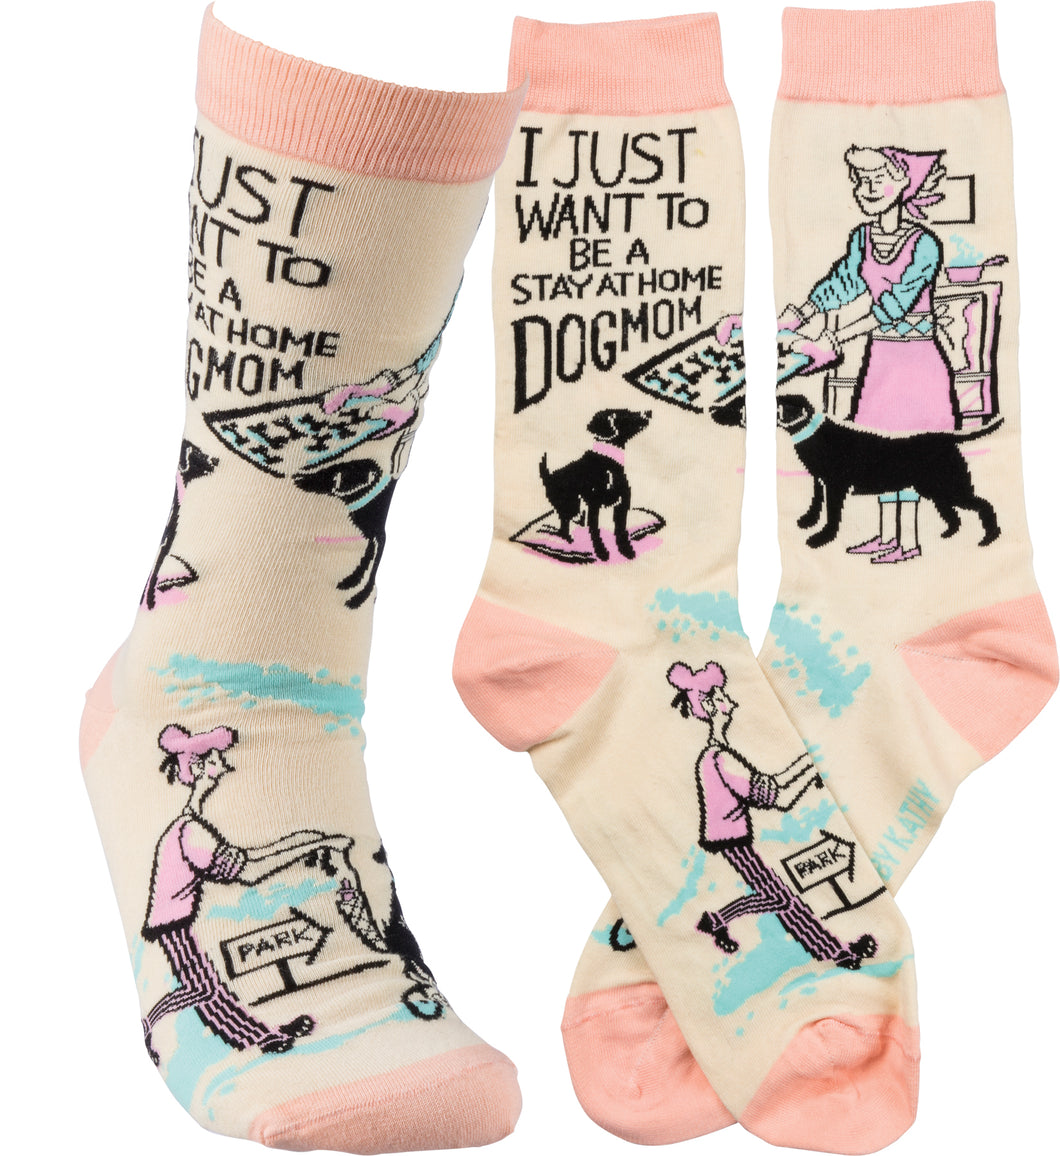 I Just Want to be a Stay At Home Dog Mom - Crew Socks